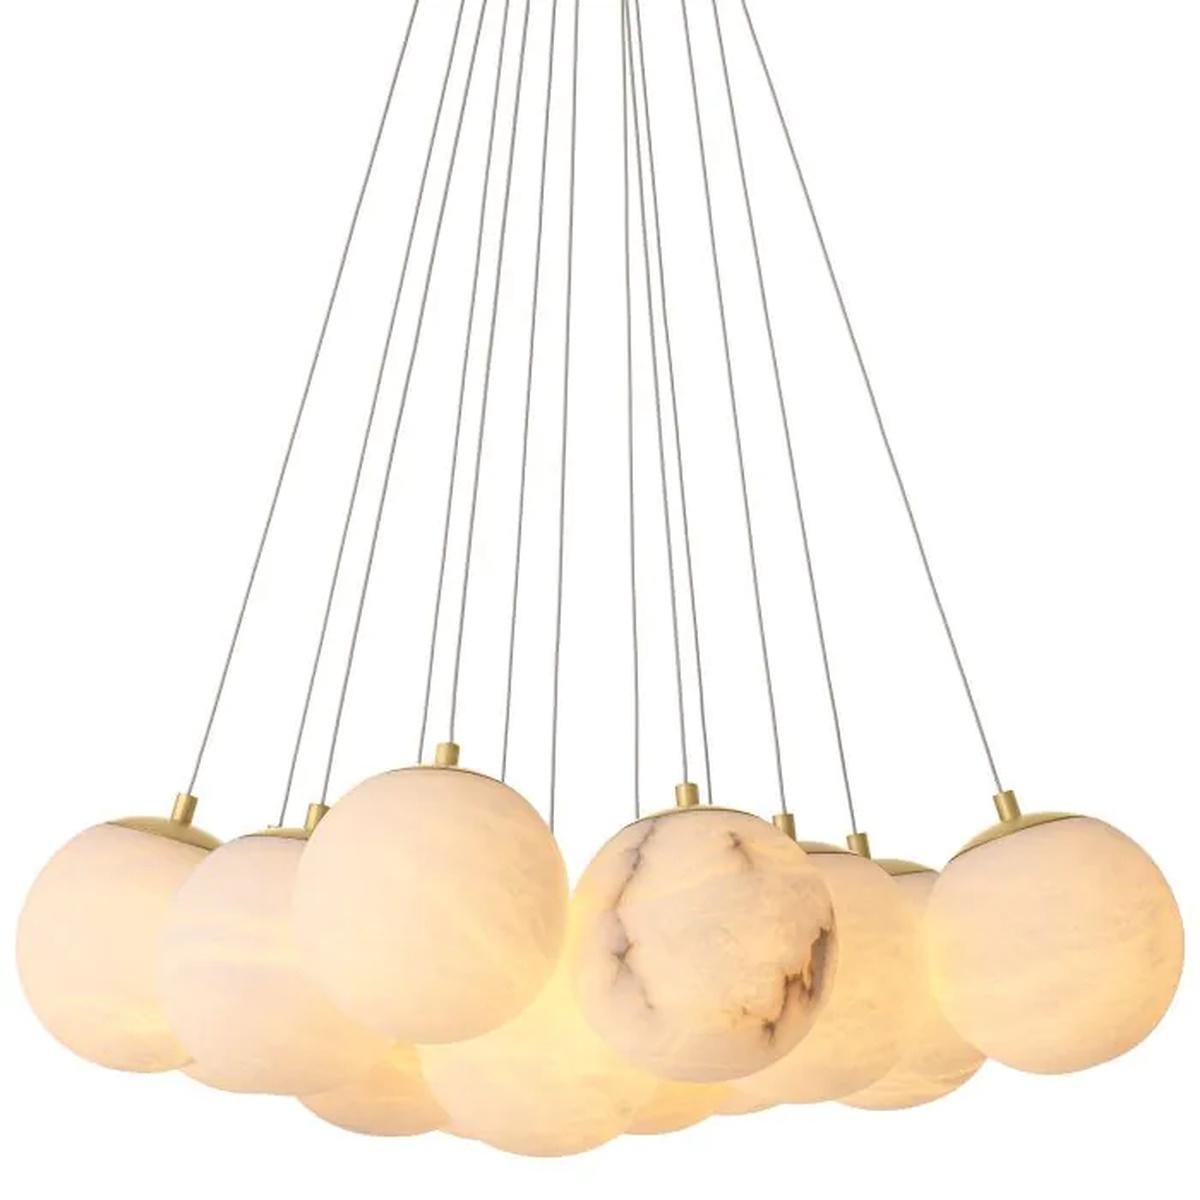 European 21st Century Chandelier in Alabaster with Ballons For Sale